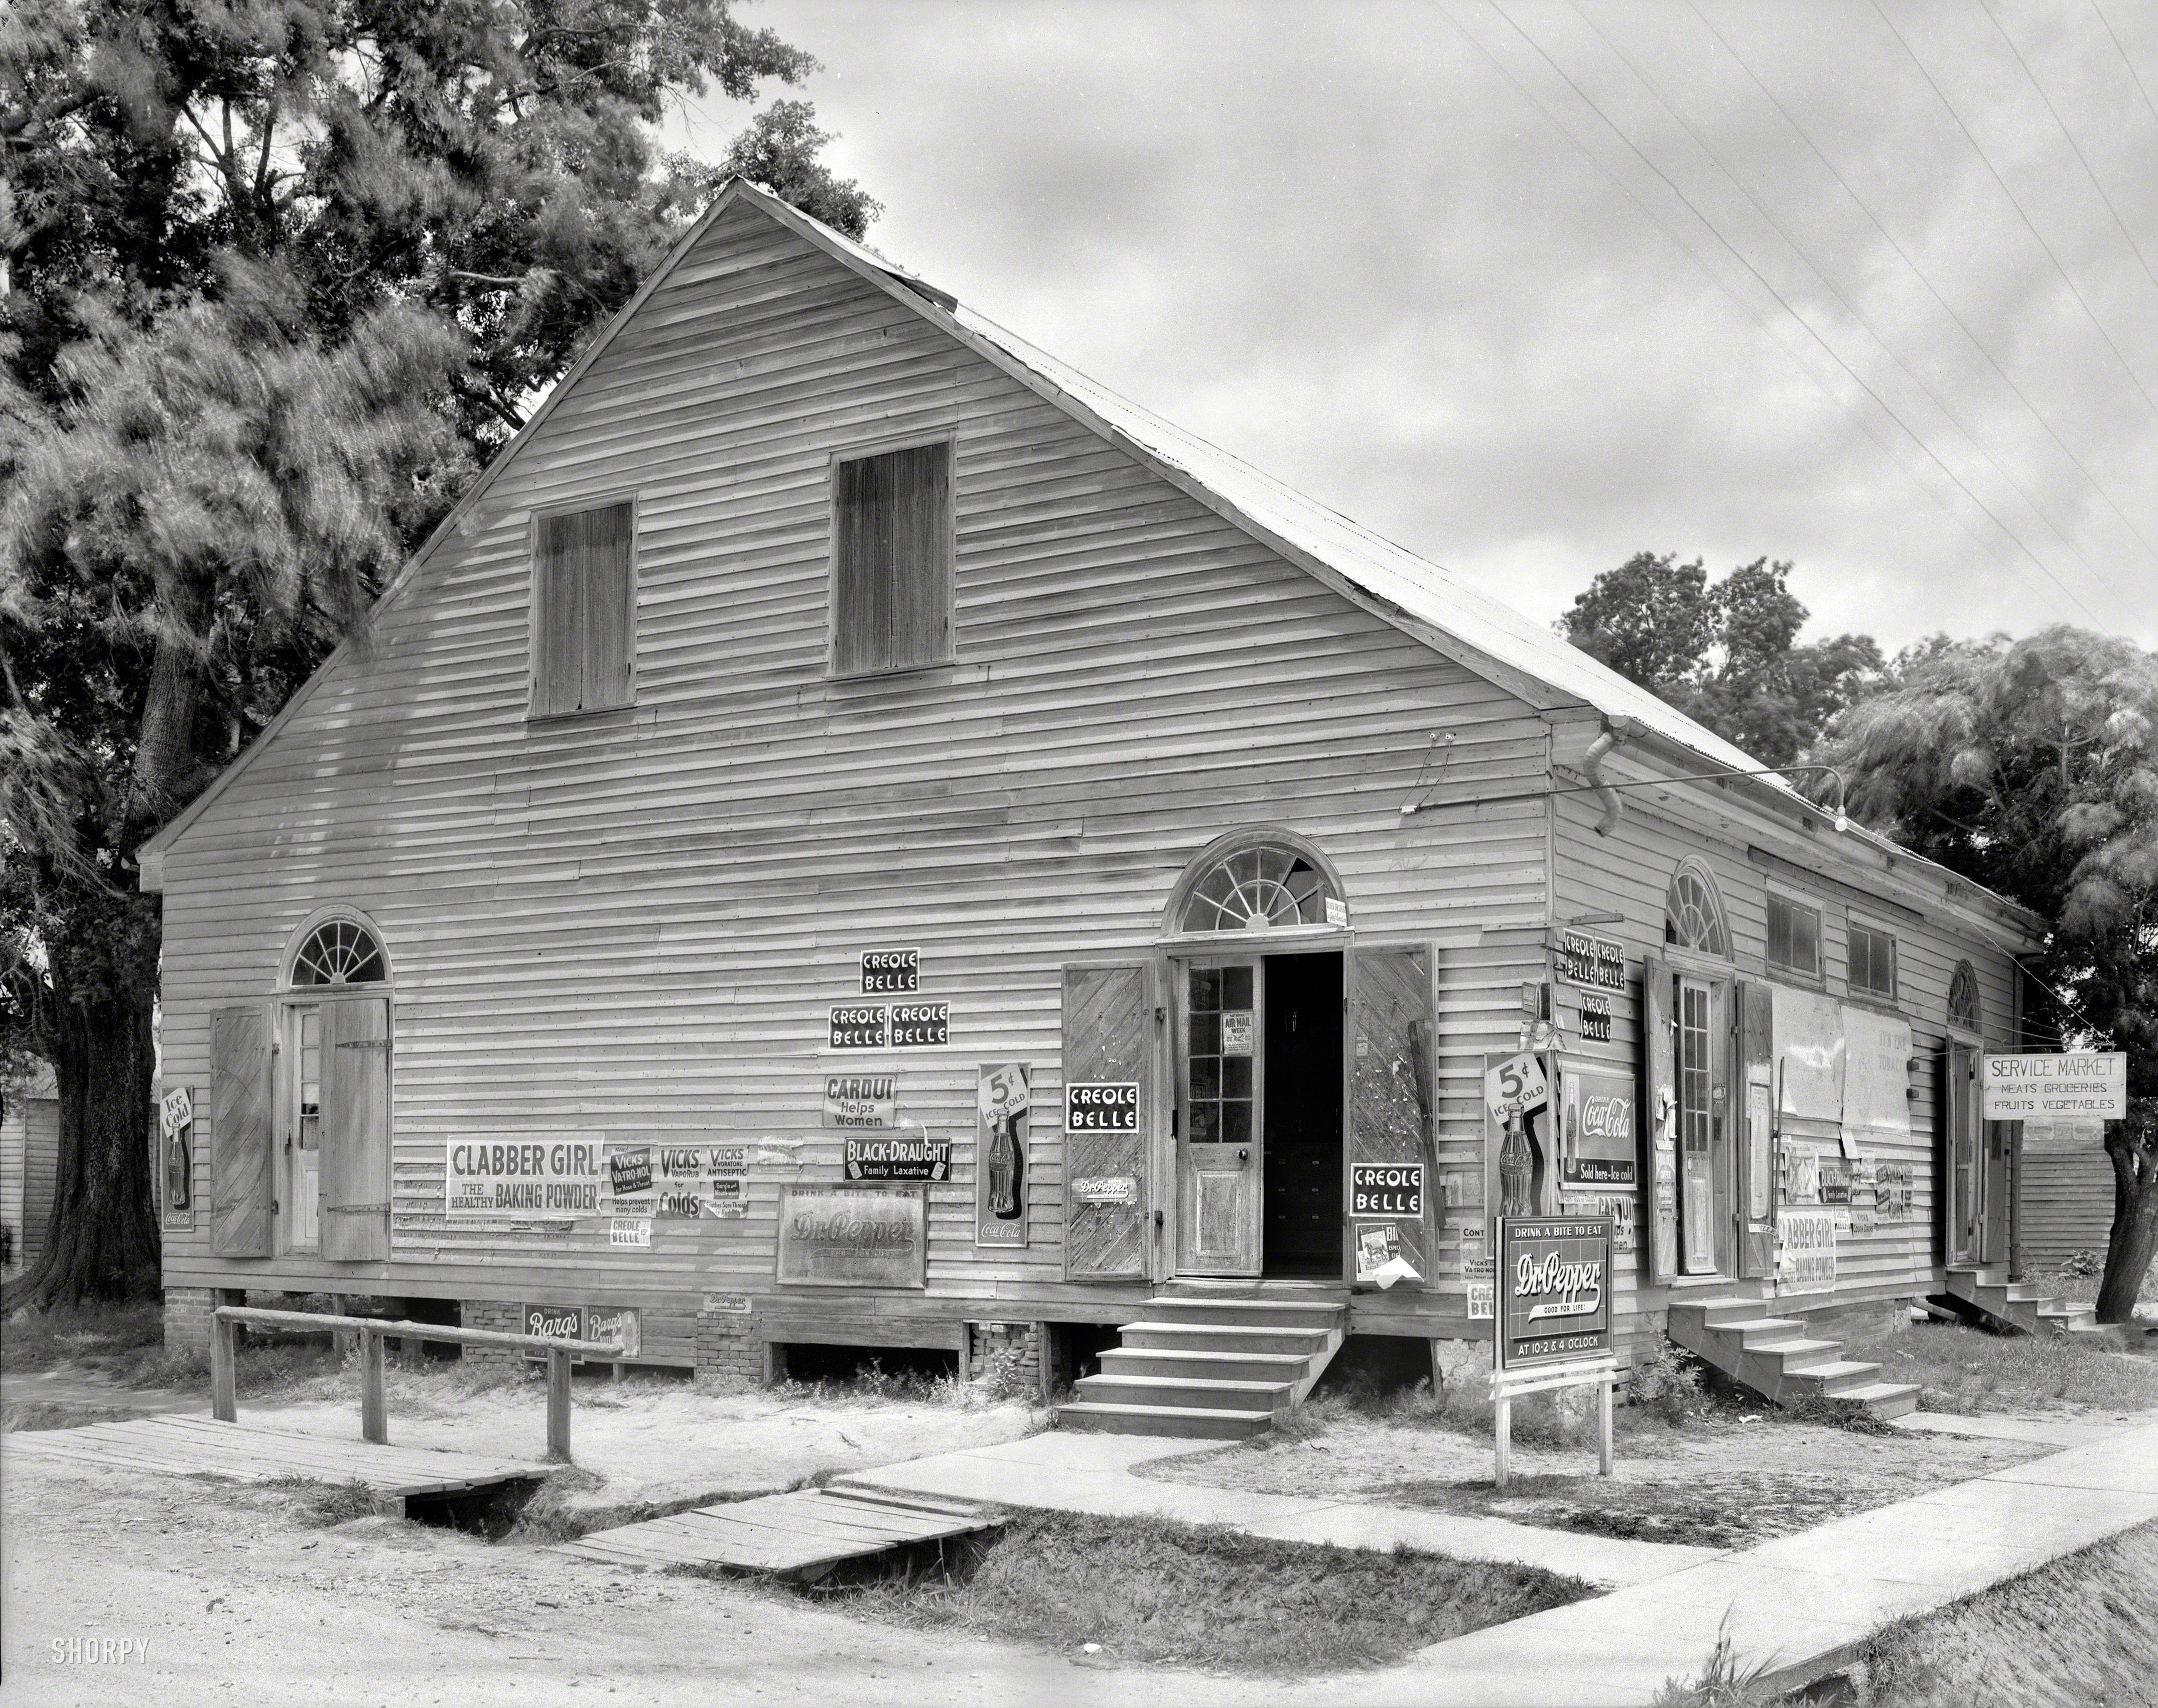 1938. "Petitin's Store, Grand Coteau, St. Landry Parish, Louisiana. Building dates to ca. 1834." While this ad-encrusted grocery might strike you as charmingly rustic, the Dr. Pepper sign seems to have so offended the photographer's sensibilities that for the other pictures she took, she draped it with a cloth. 8x10 acetate negative by Frances Benjamin Johnston. View full size.